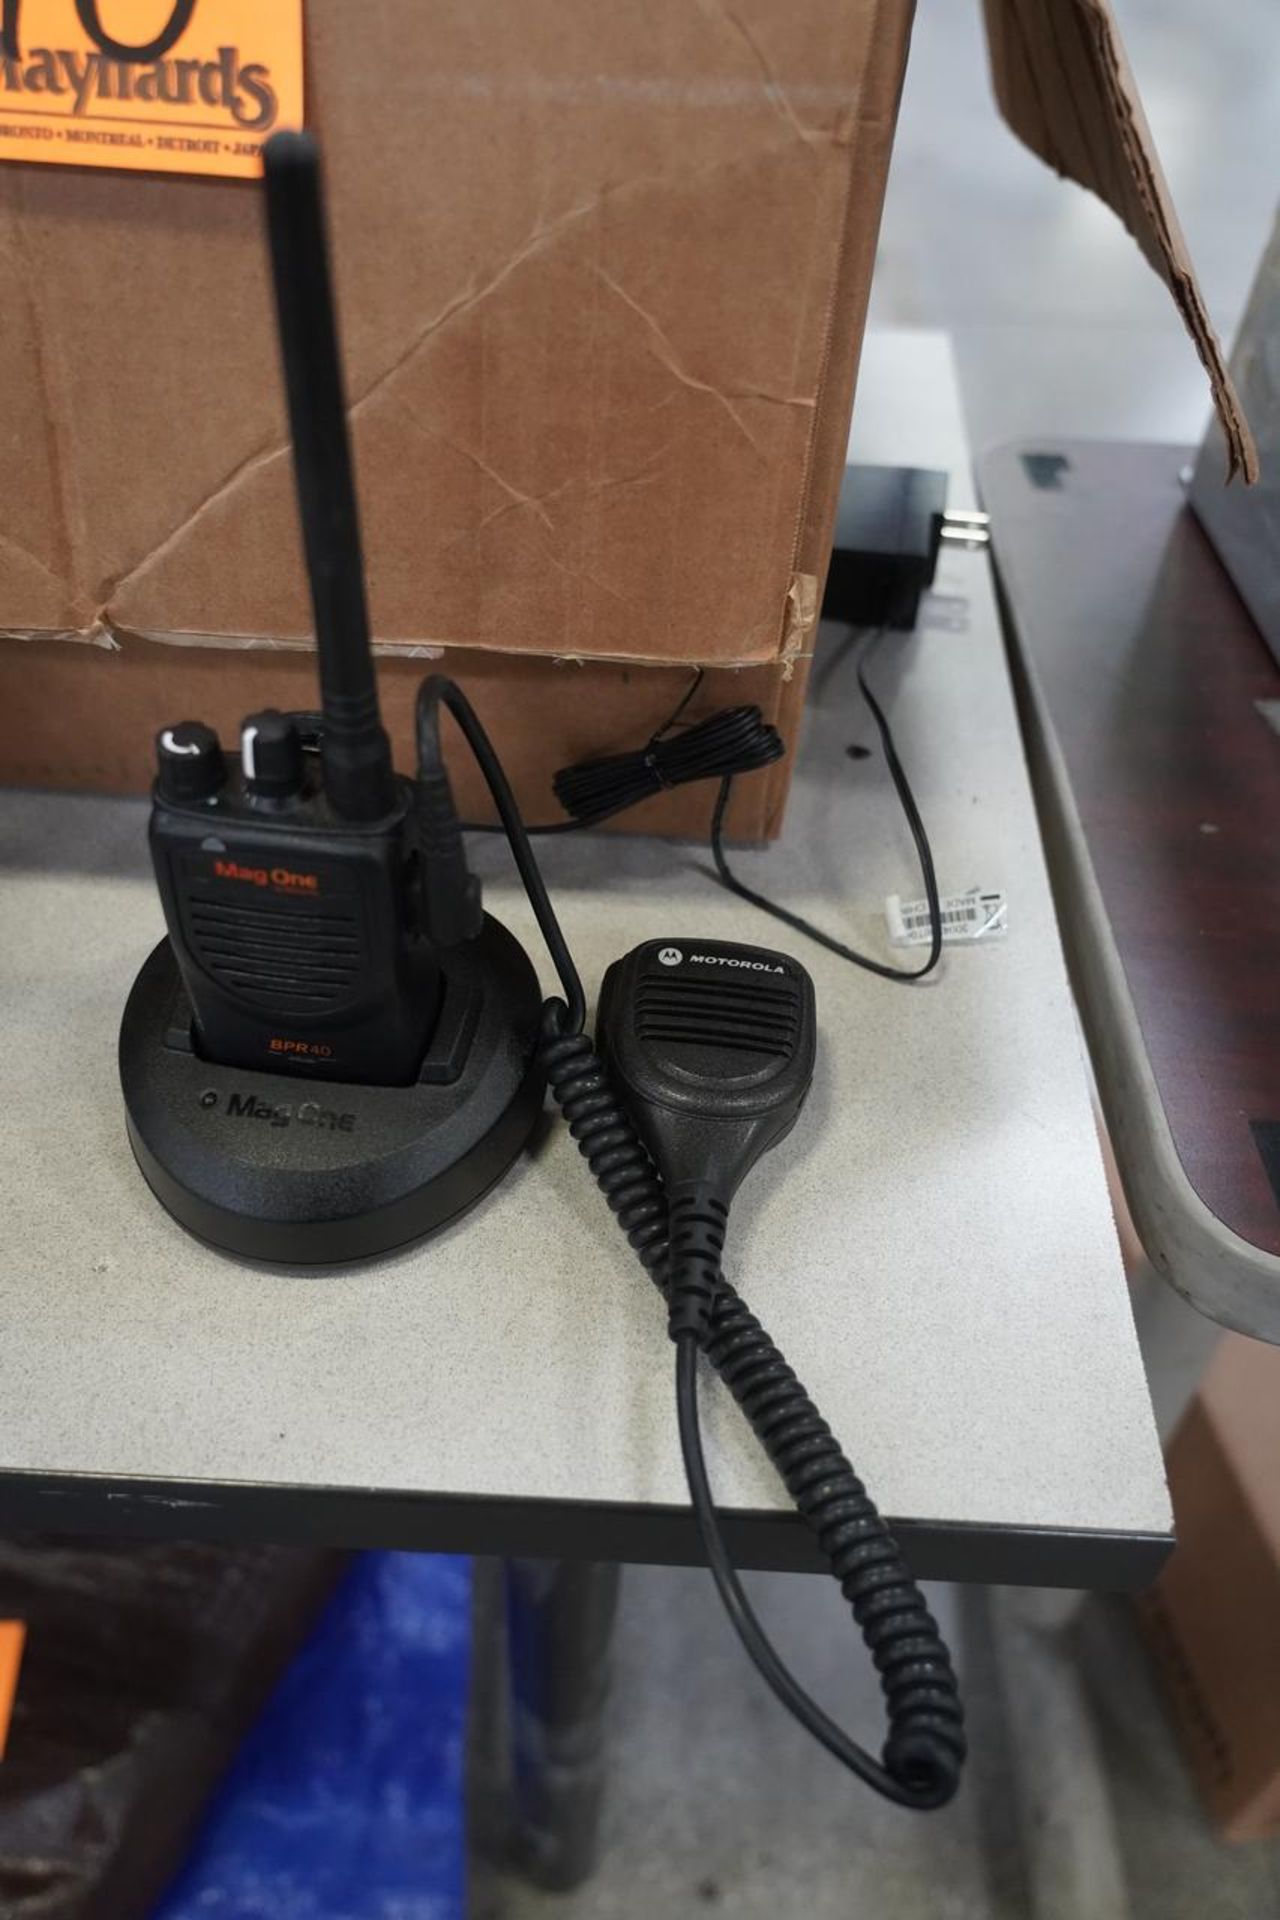 Motorola Mag One - BPR 40 Walkie Talkies and Battery Chargers - Image 4 of 4